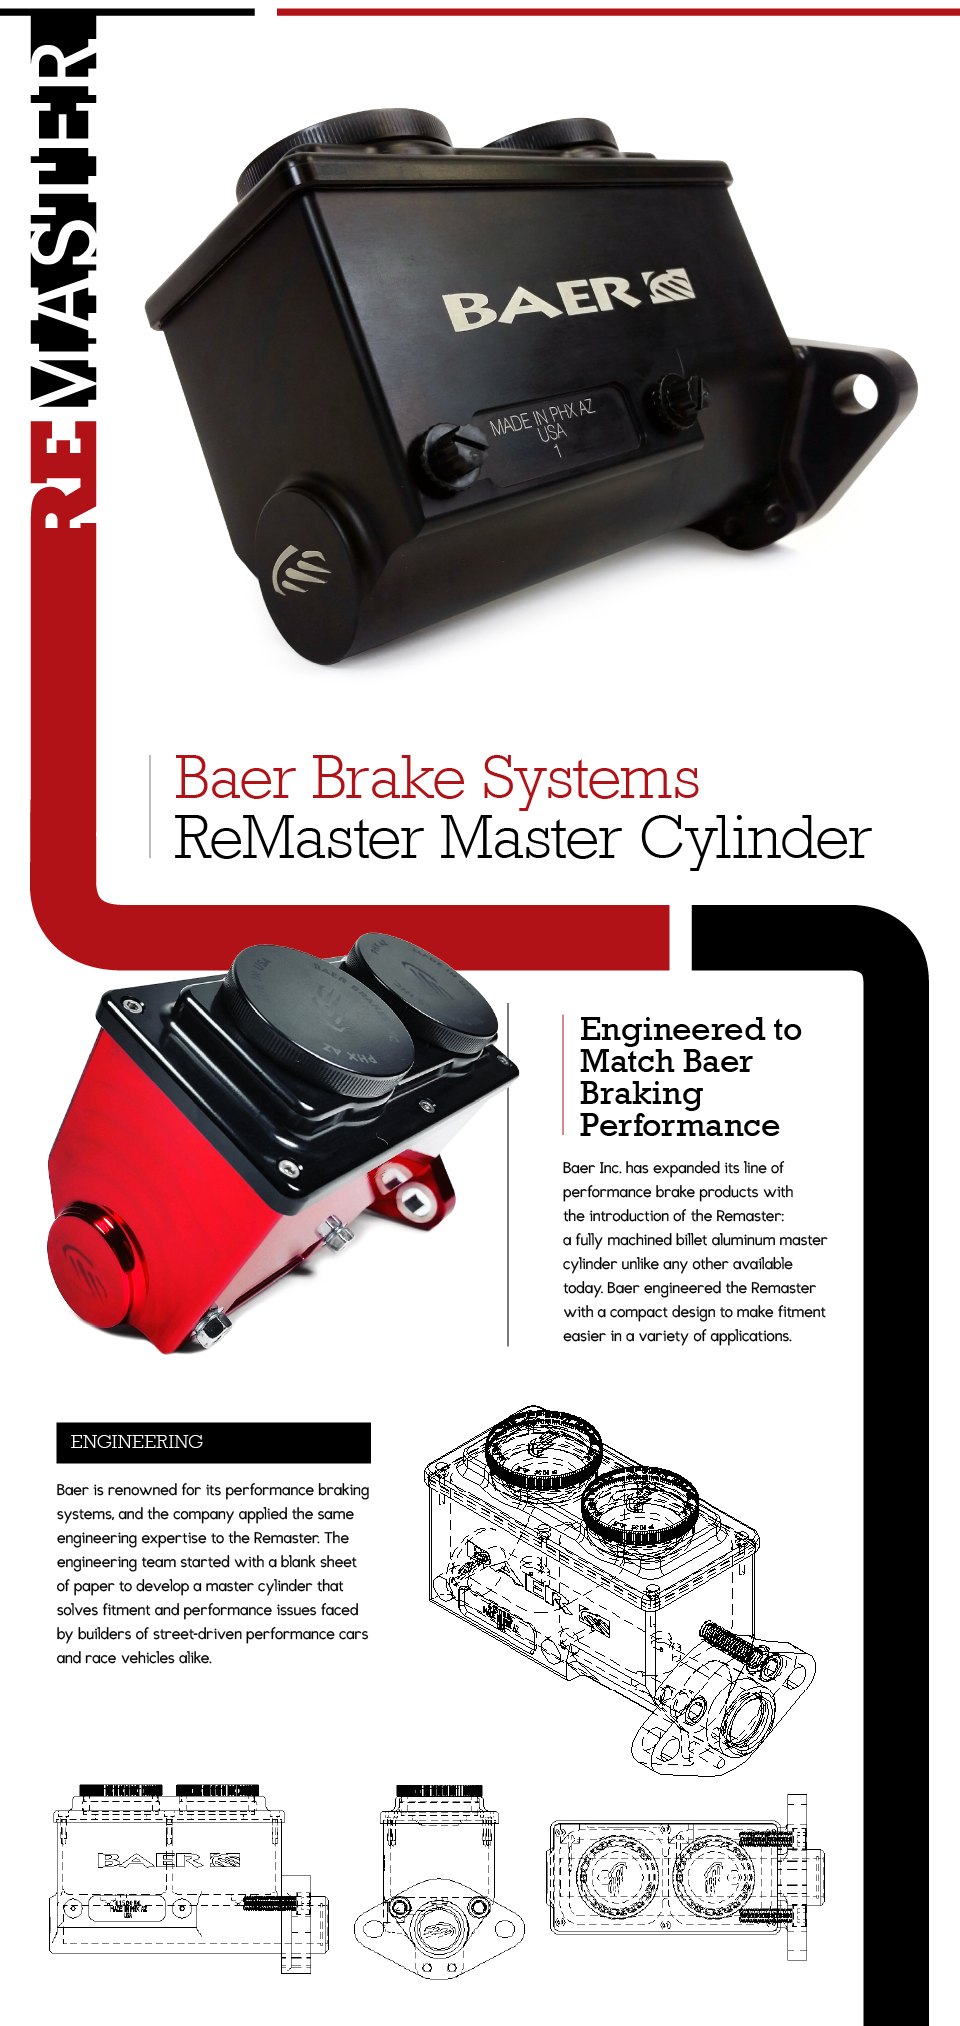 Re-Master Cylinders